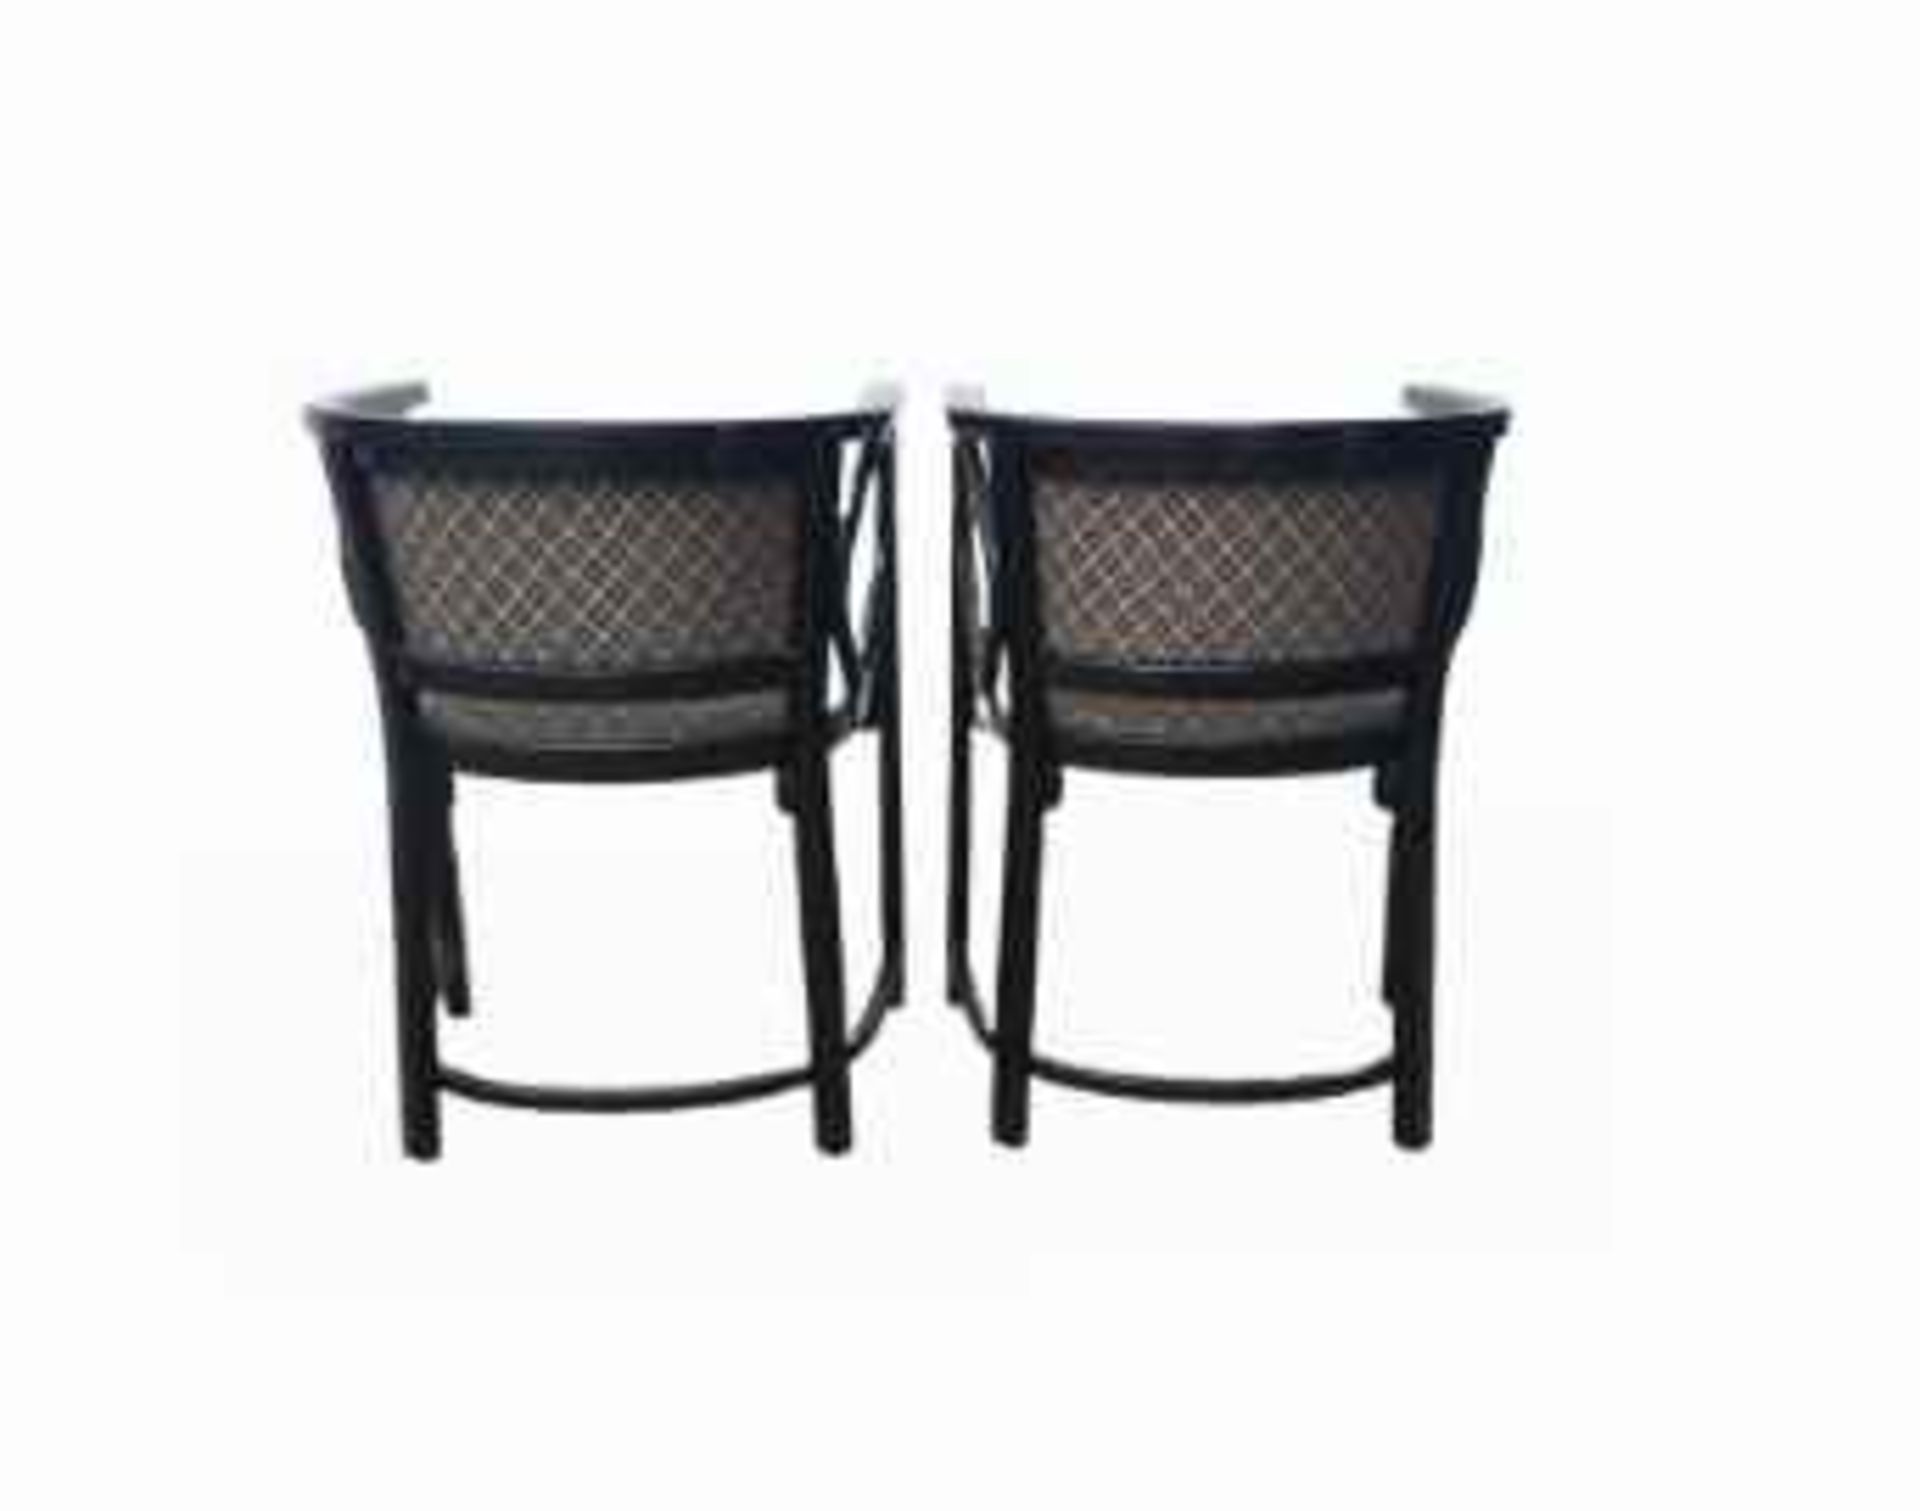 Thonet | Varient "Fledermaus" | 3 Piece Set: 2 Chairs & 1 Table - Image 5 of 8